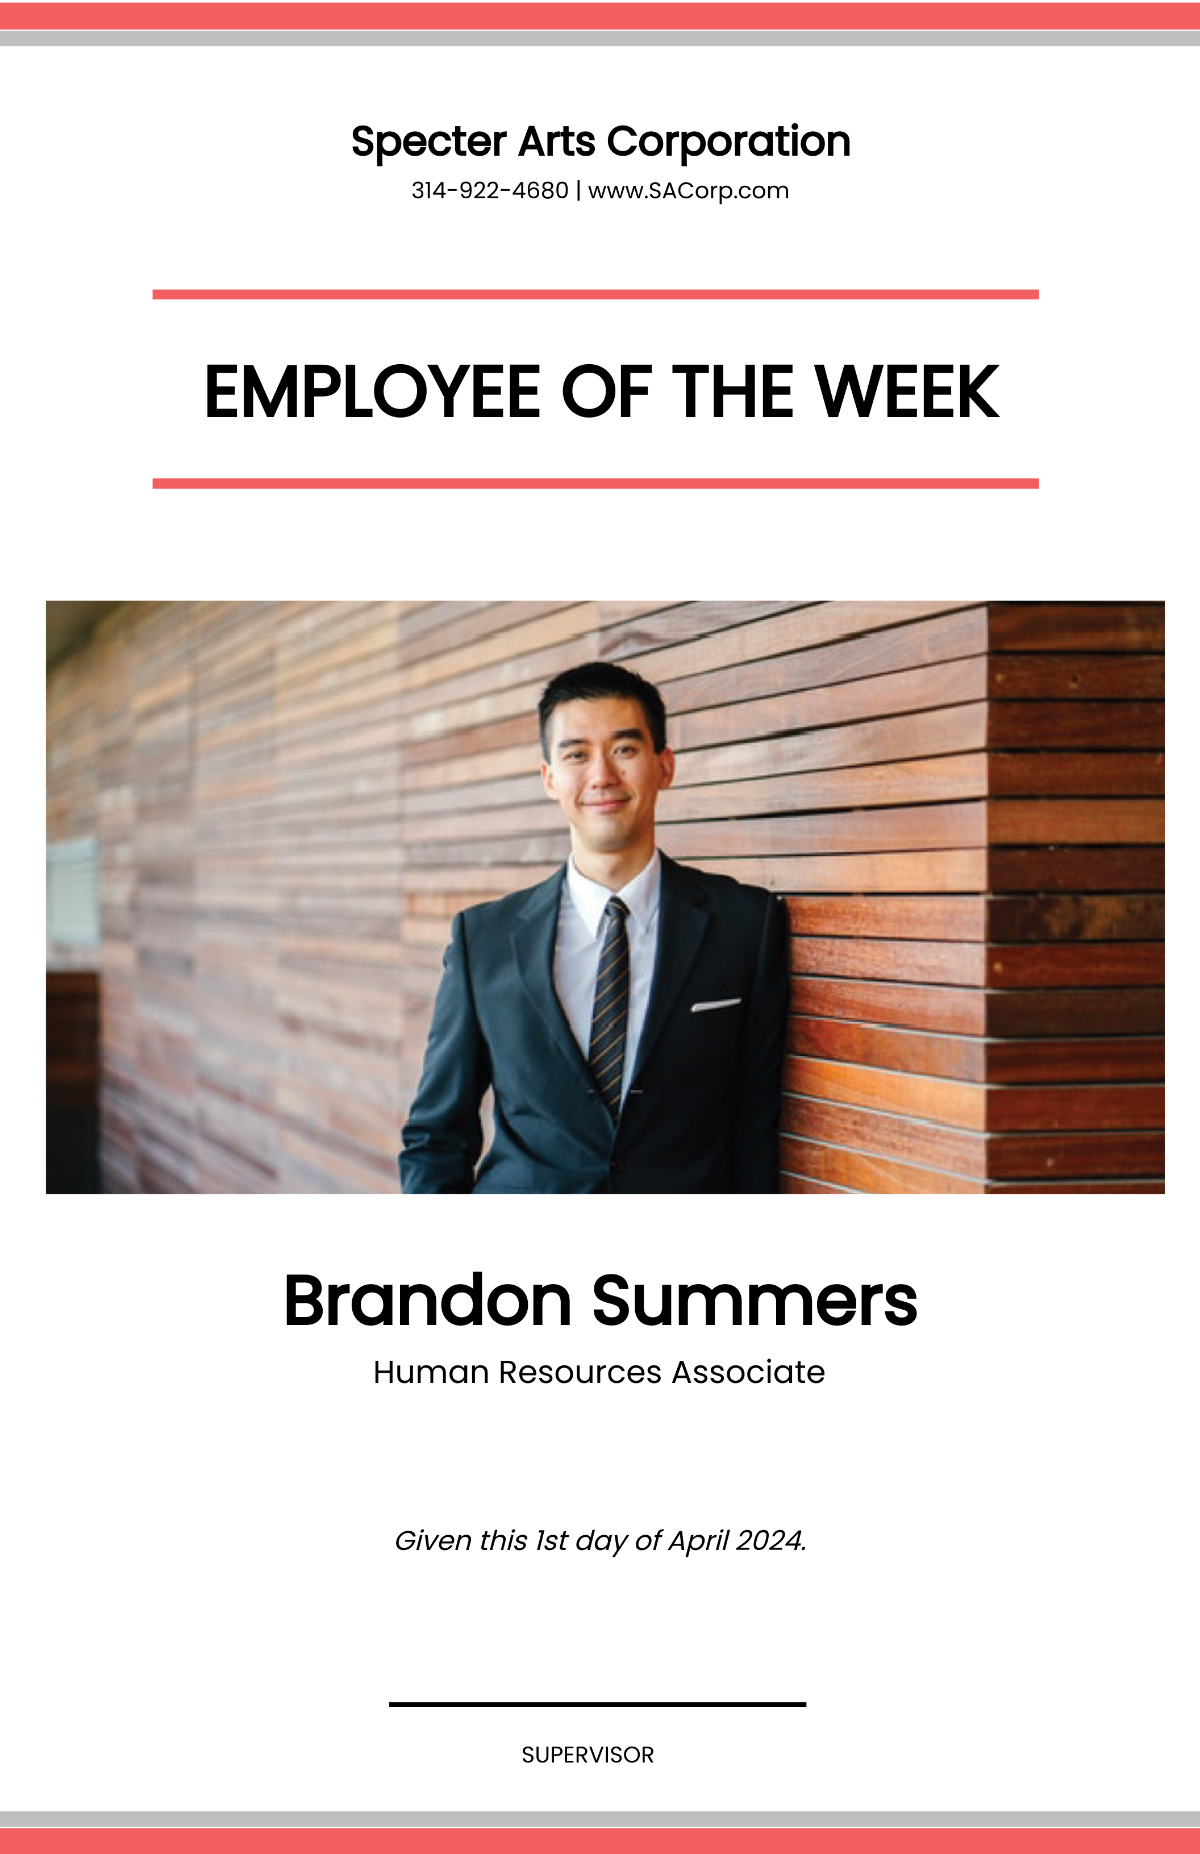 Free Best Employee of the Week Poster Template